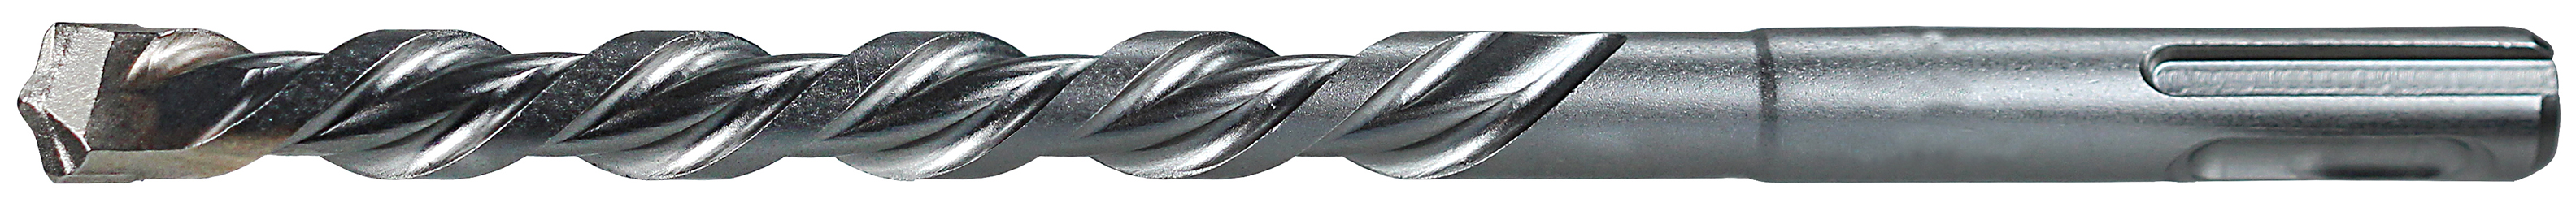 Rotary Hammer Drill Bit, 5/8 in. bit diameter, 18 in. overall length, Straight shank type, 3 flutes, Tip-Carbide material, 16 in. drilling depth